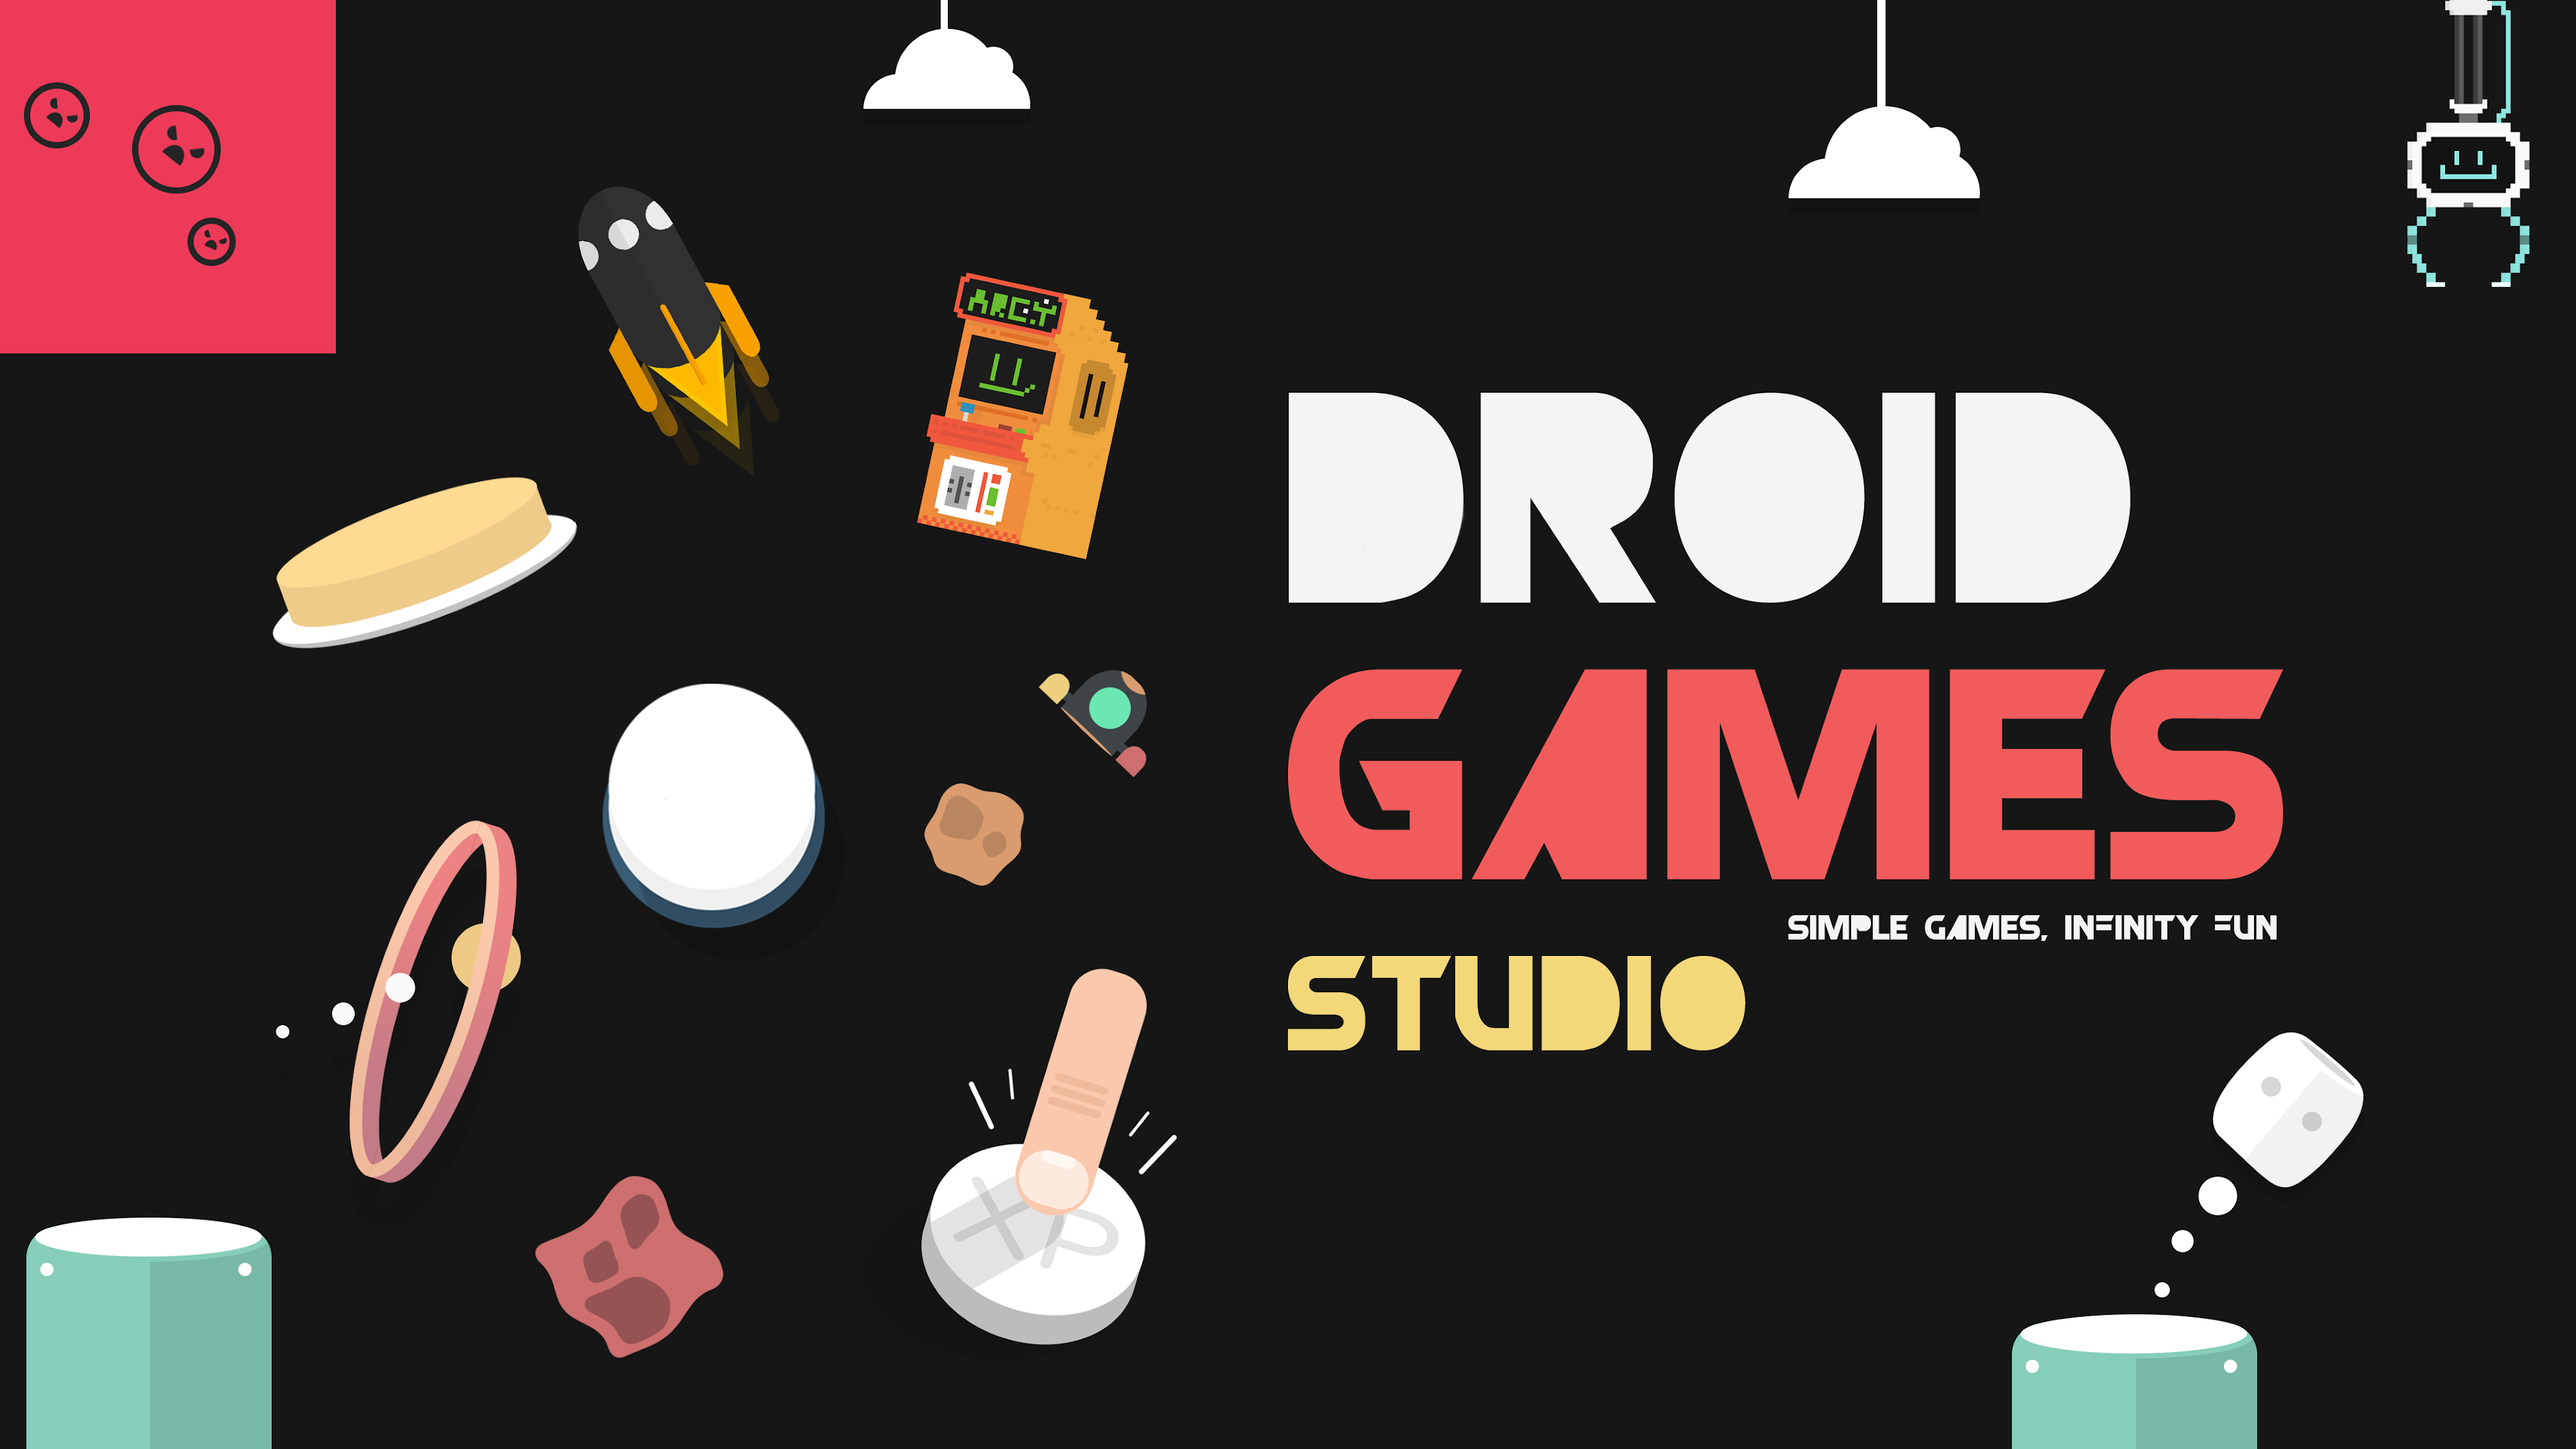 Android Puzzle Games - Hardcore Droid